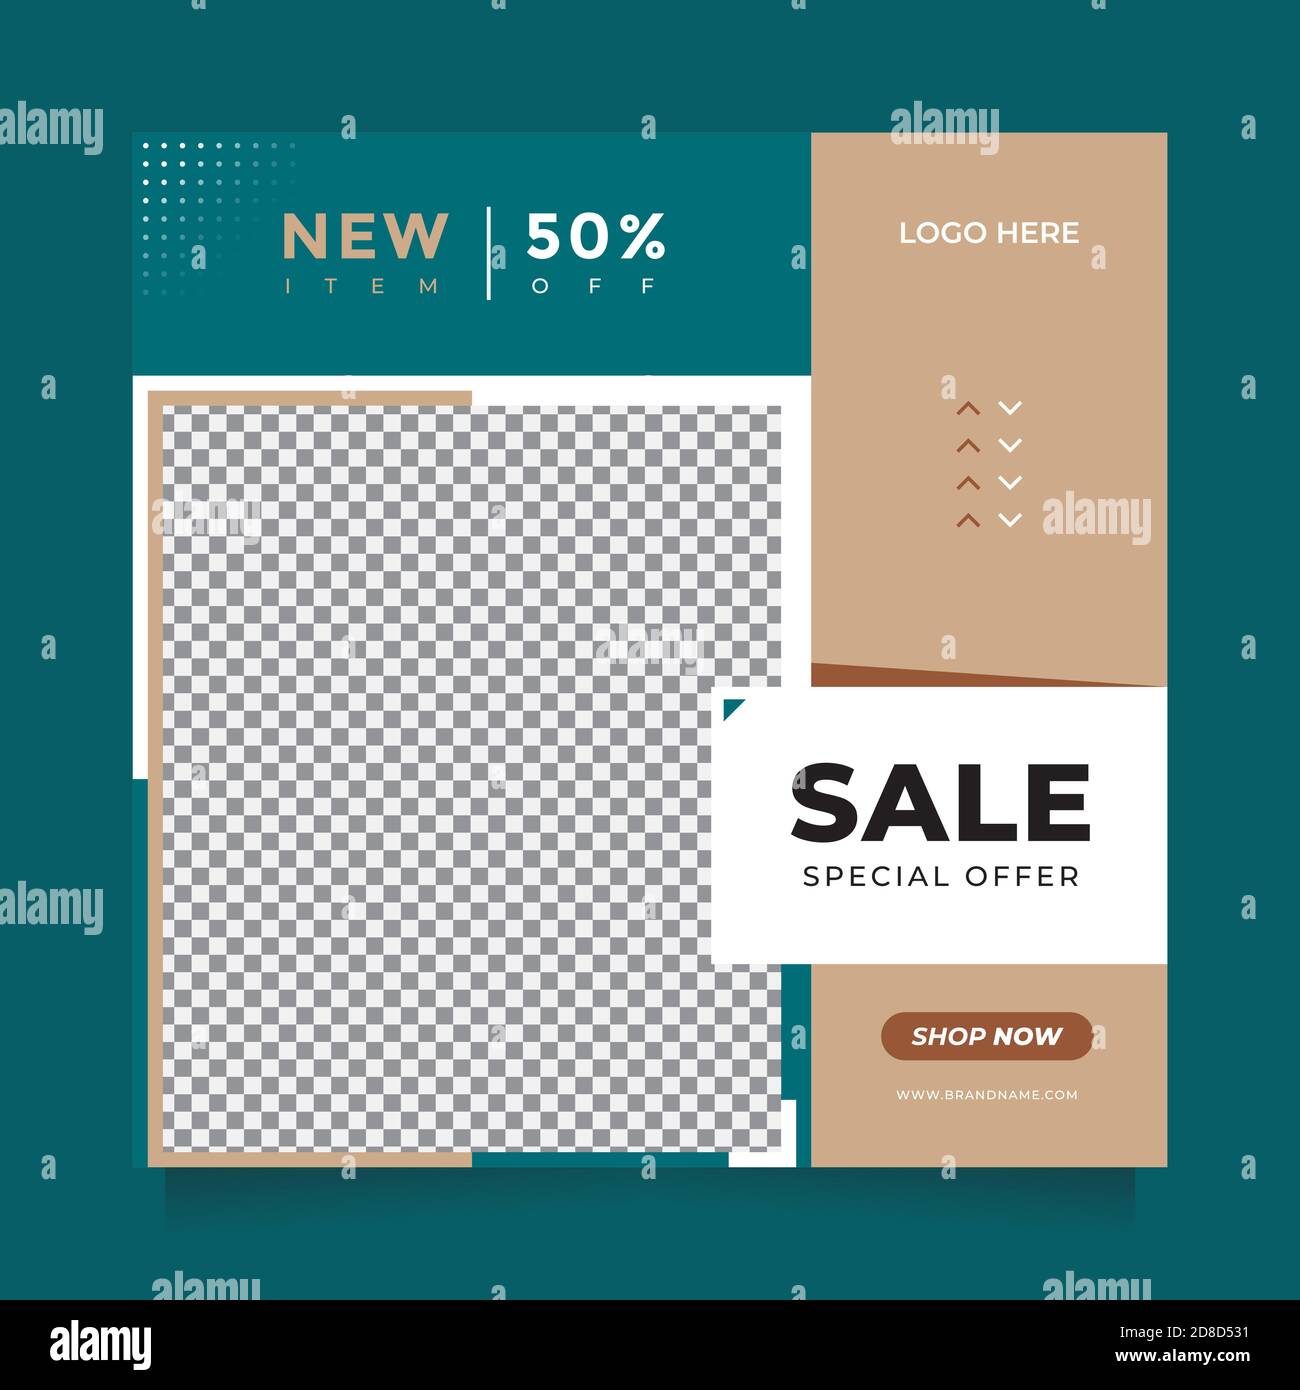 Special Offer fashion sale social media post and web banner template for digital marketing Stock Vector